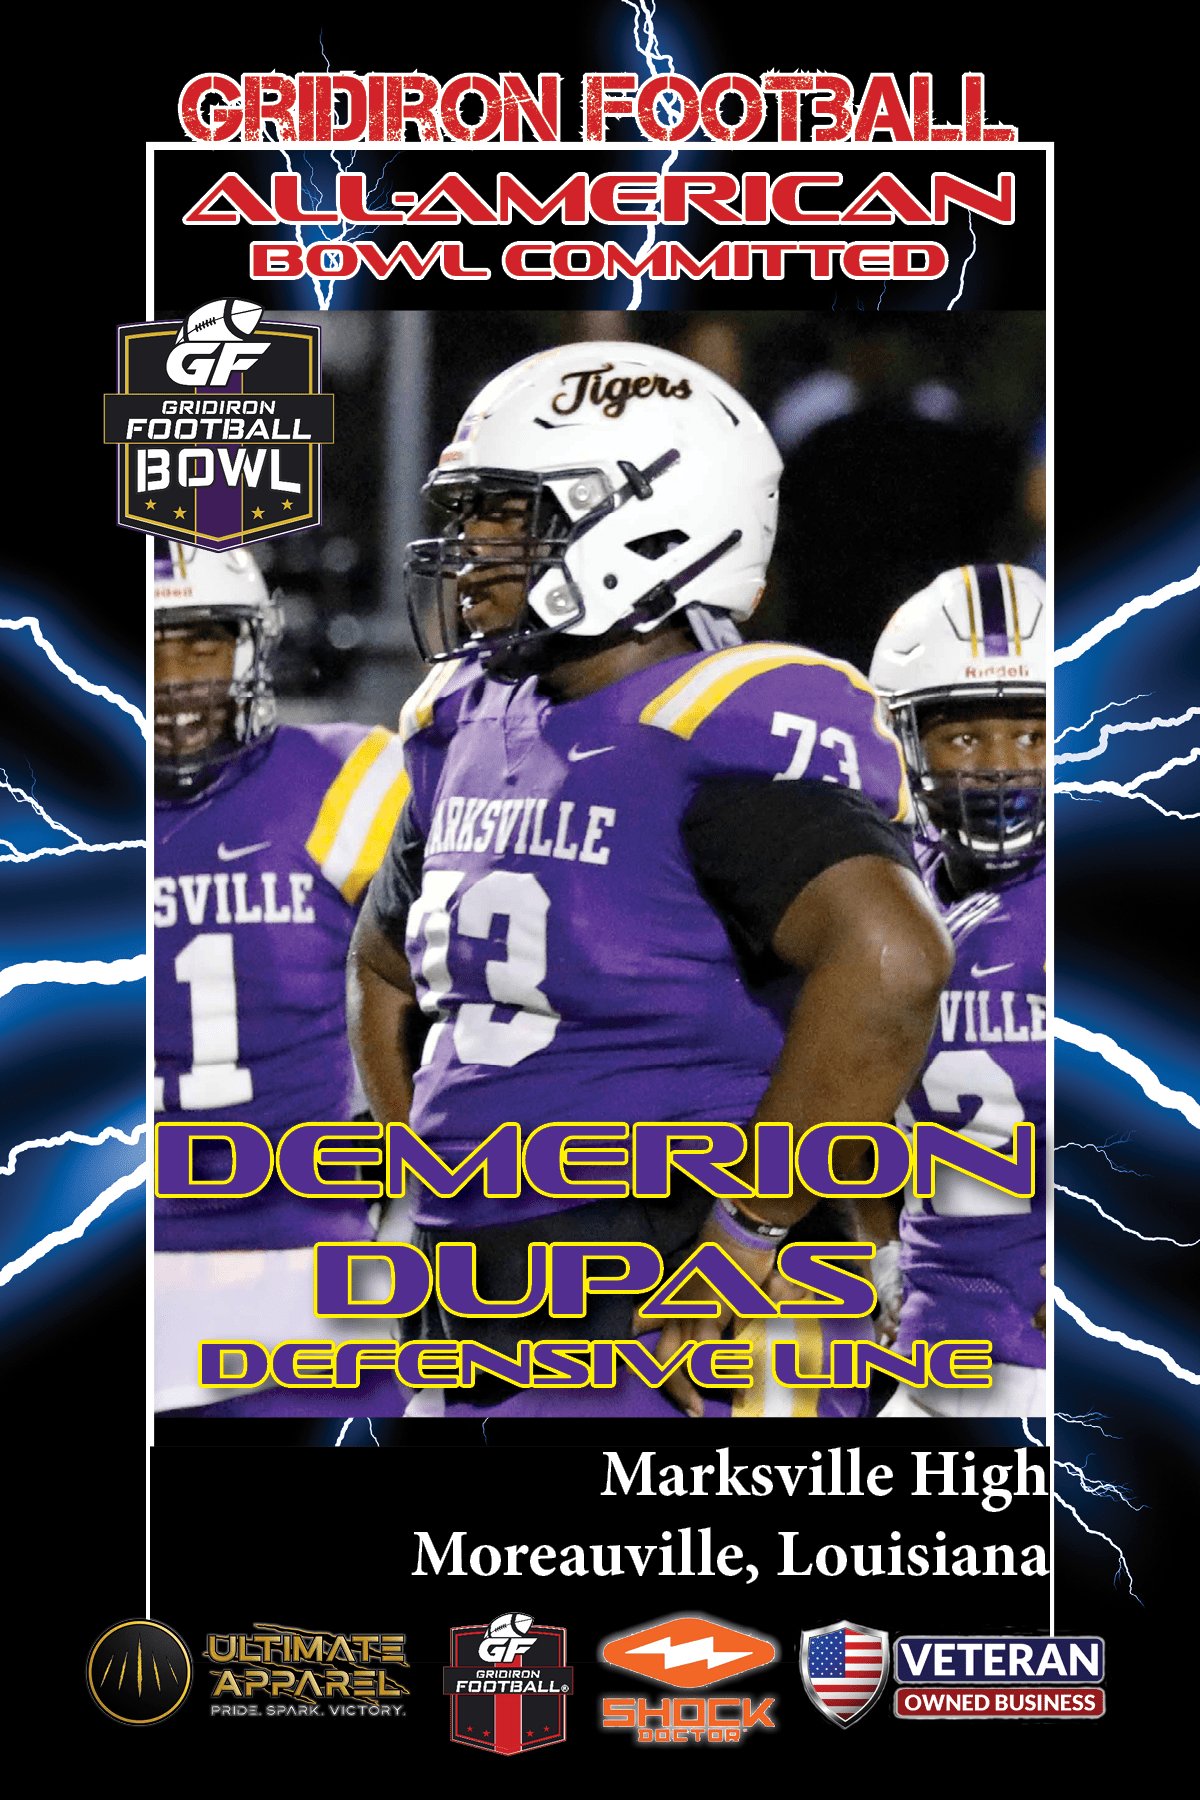 BREAKING NEWS: Marksville High School (Marksville, LA) DT Demerion Dupas Commits To The Gridiron Football All-American Bowl Game